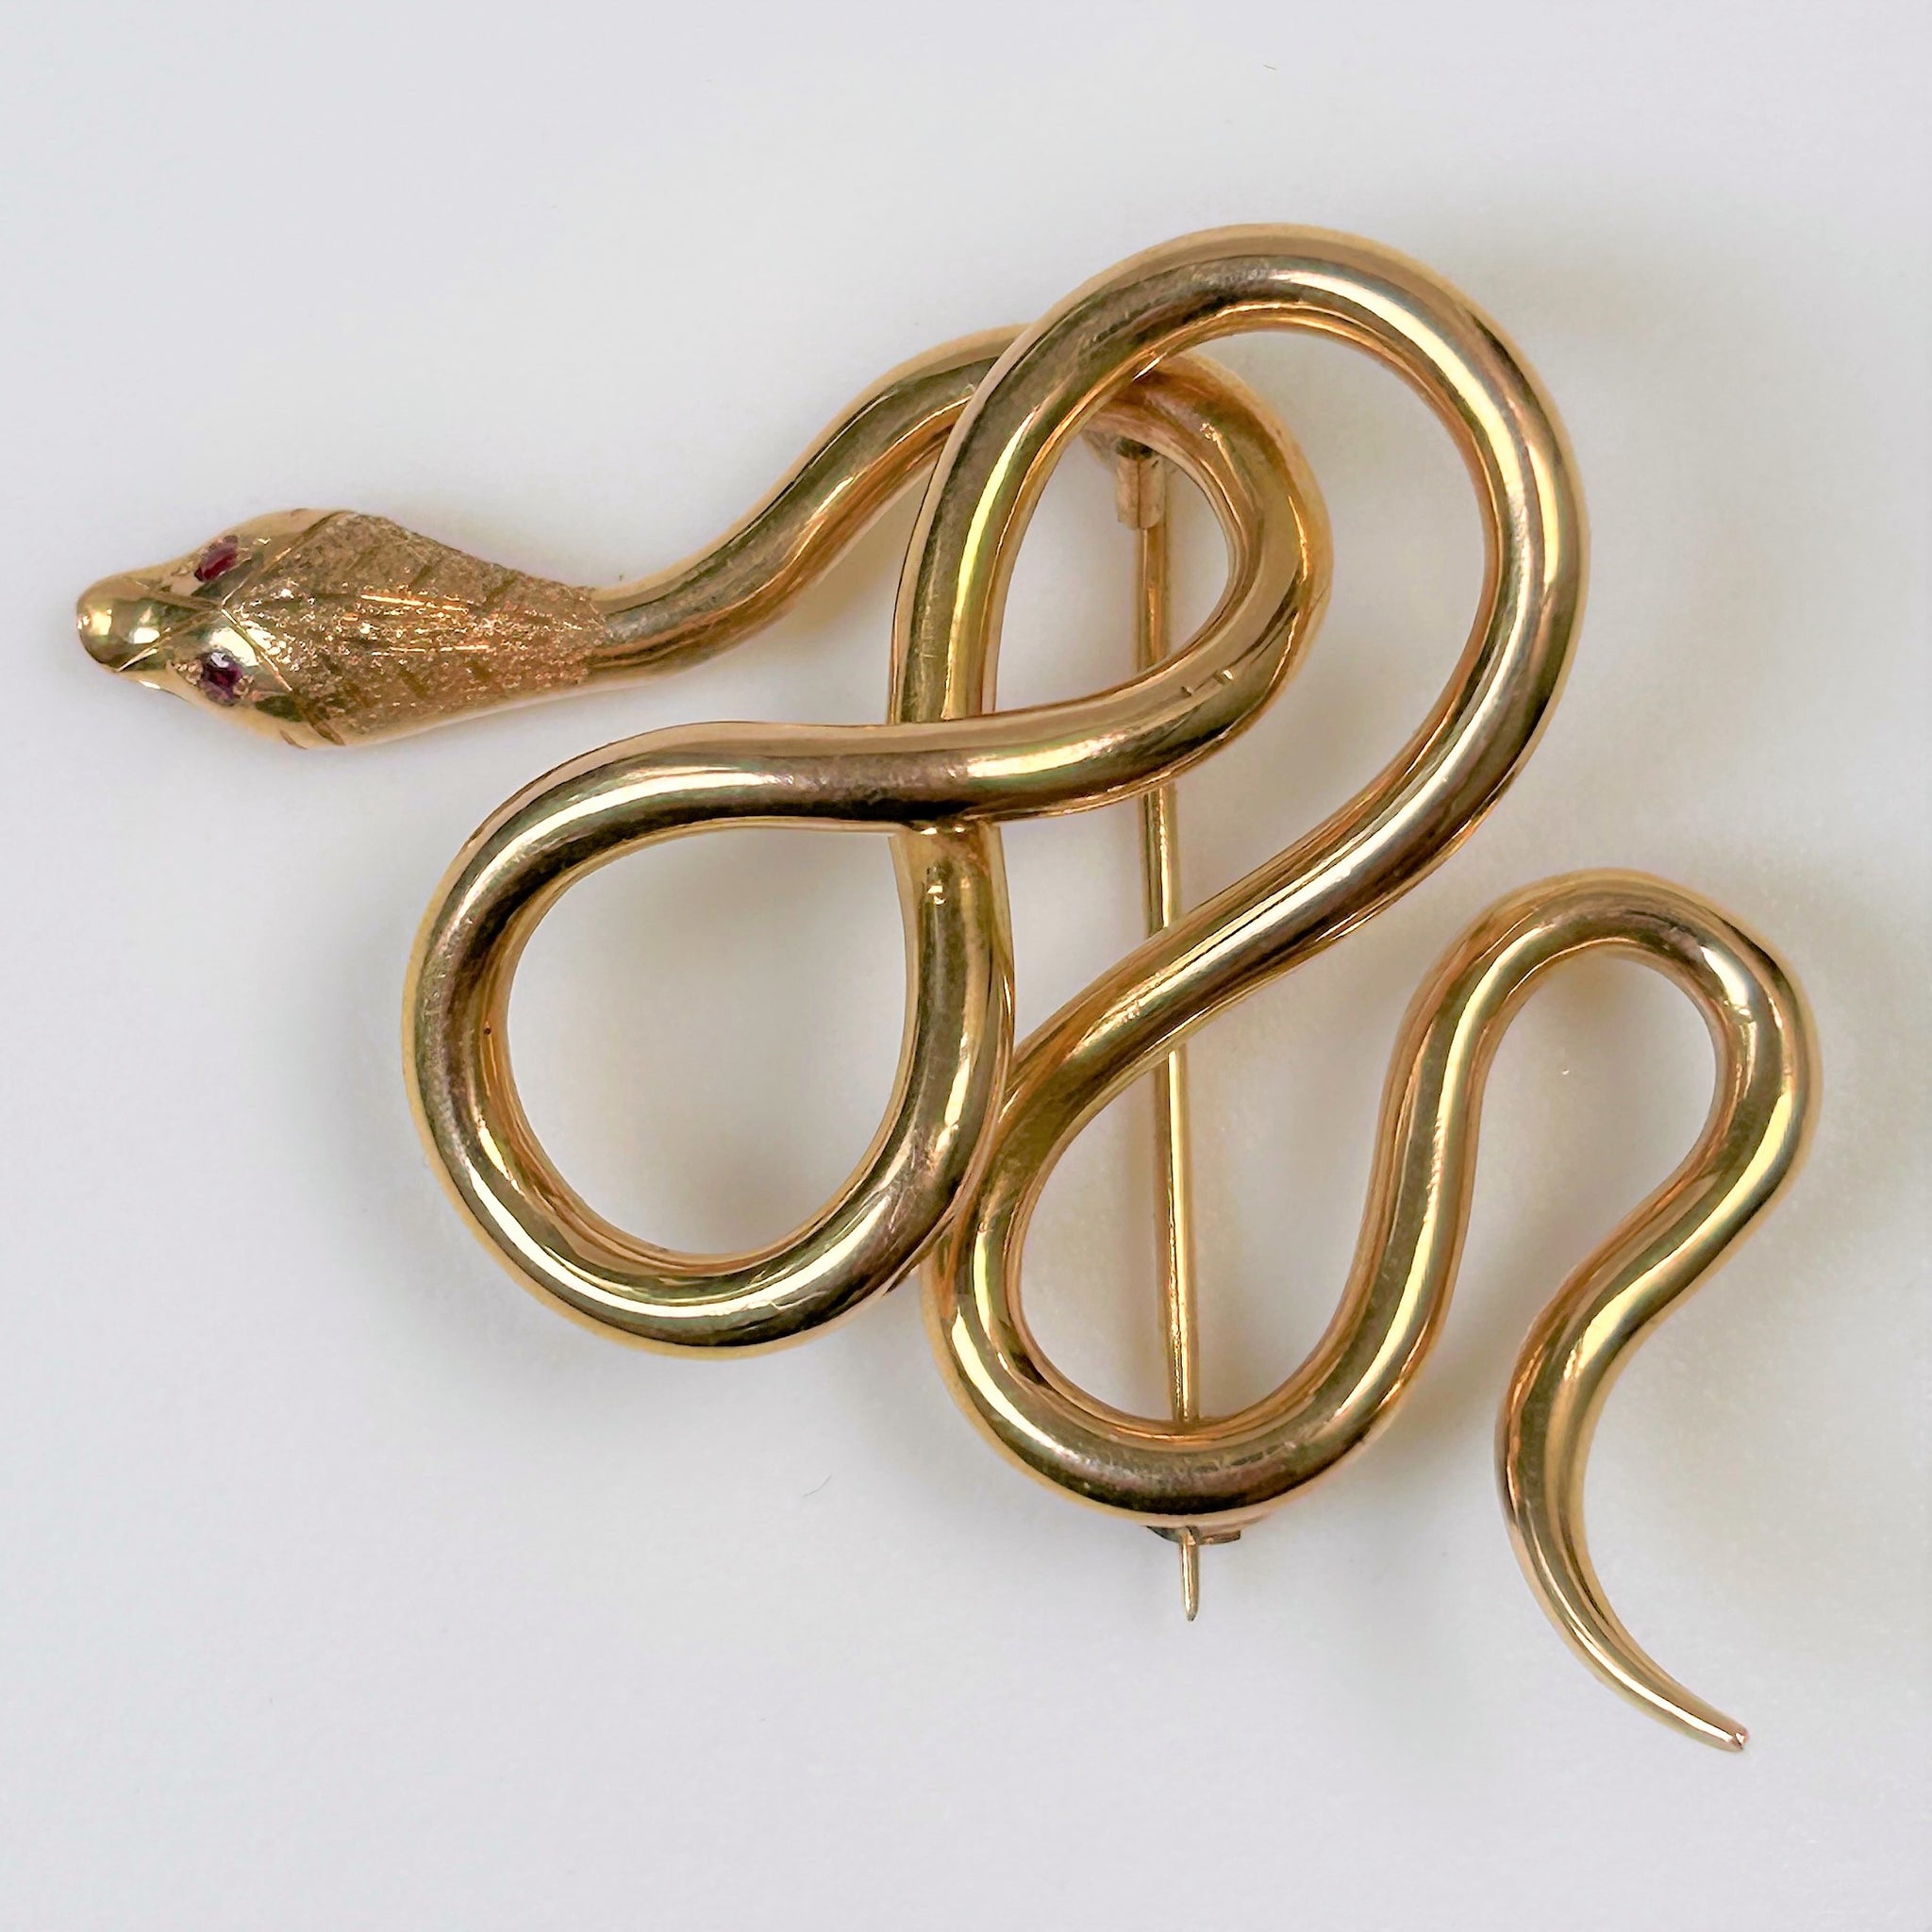 Antique 18ct Gold and Ruby “Snake” Brooch